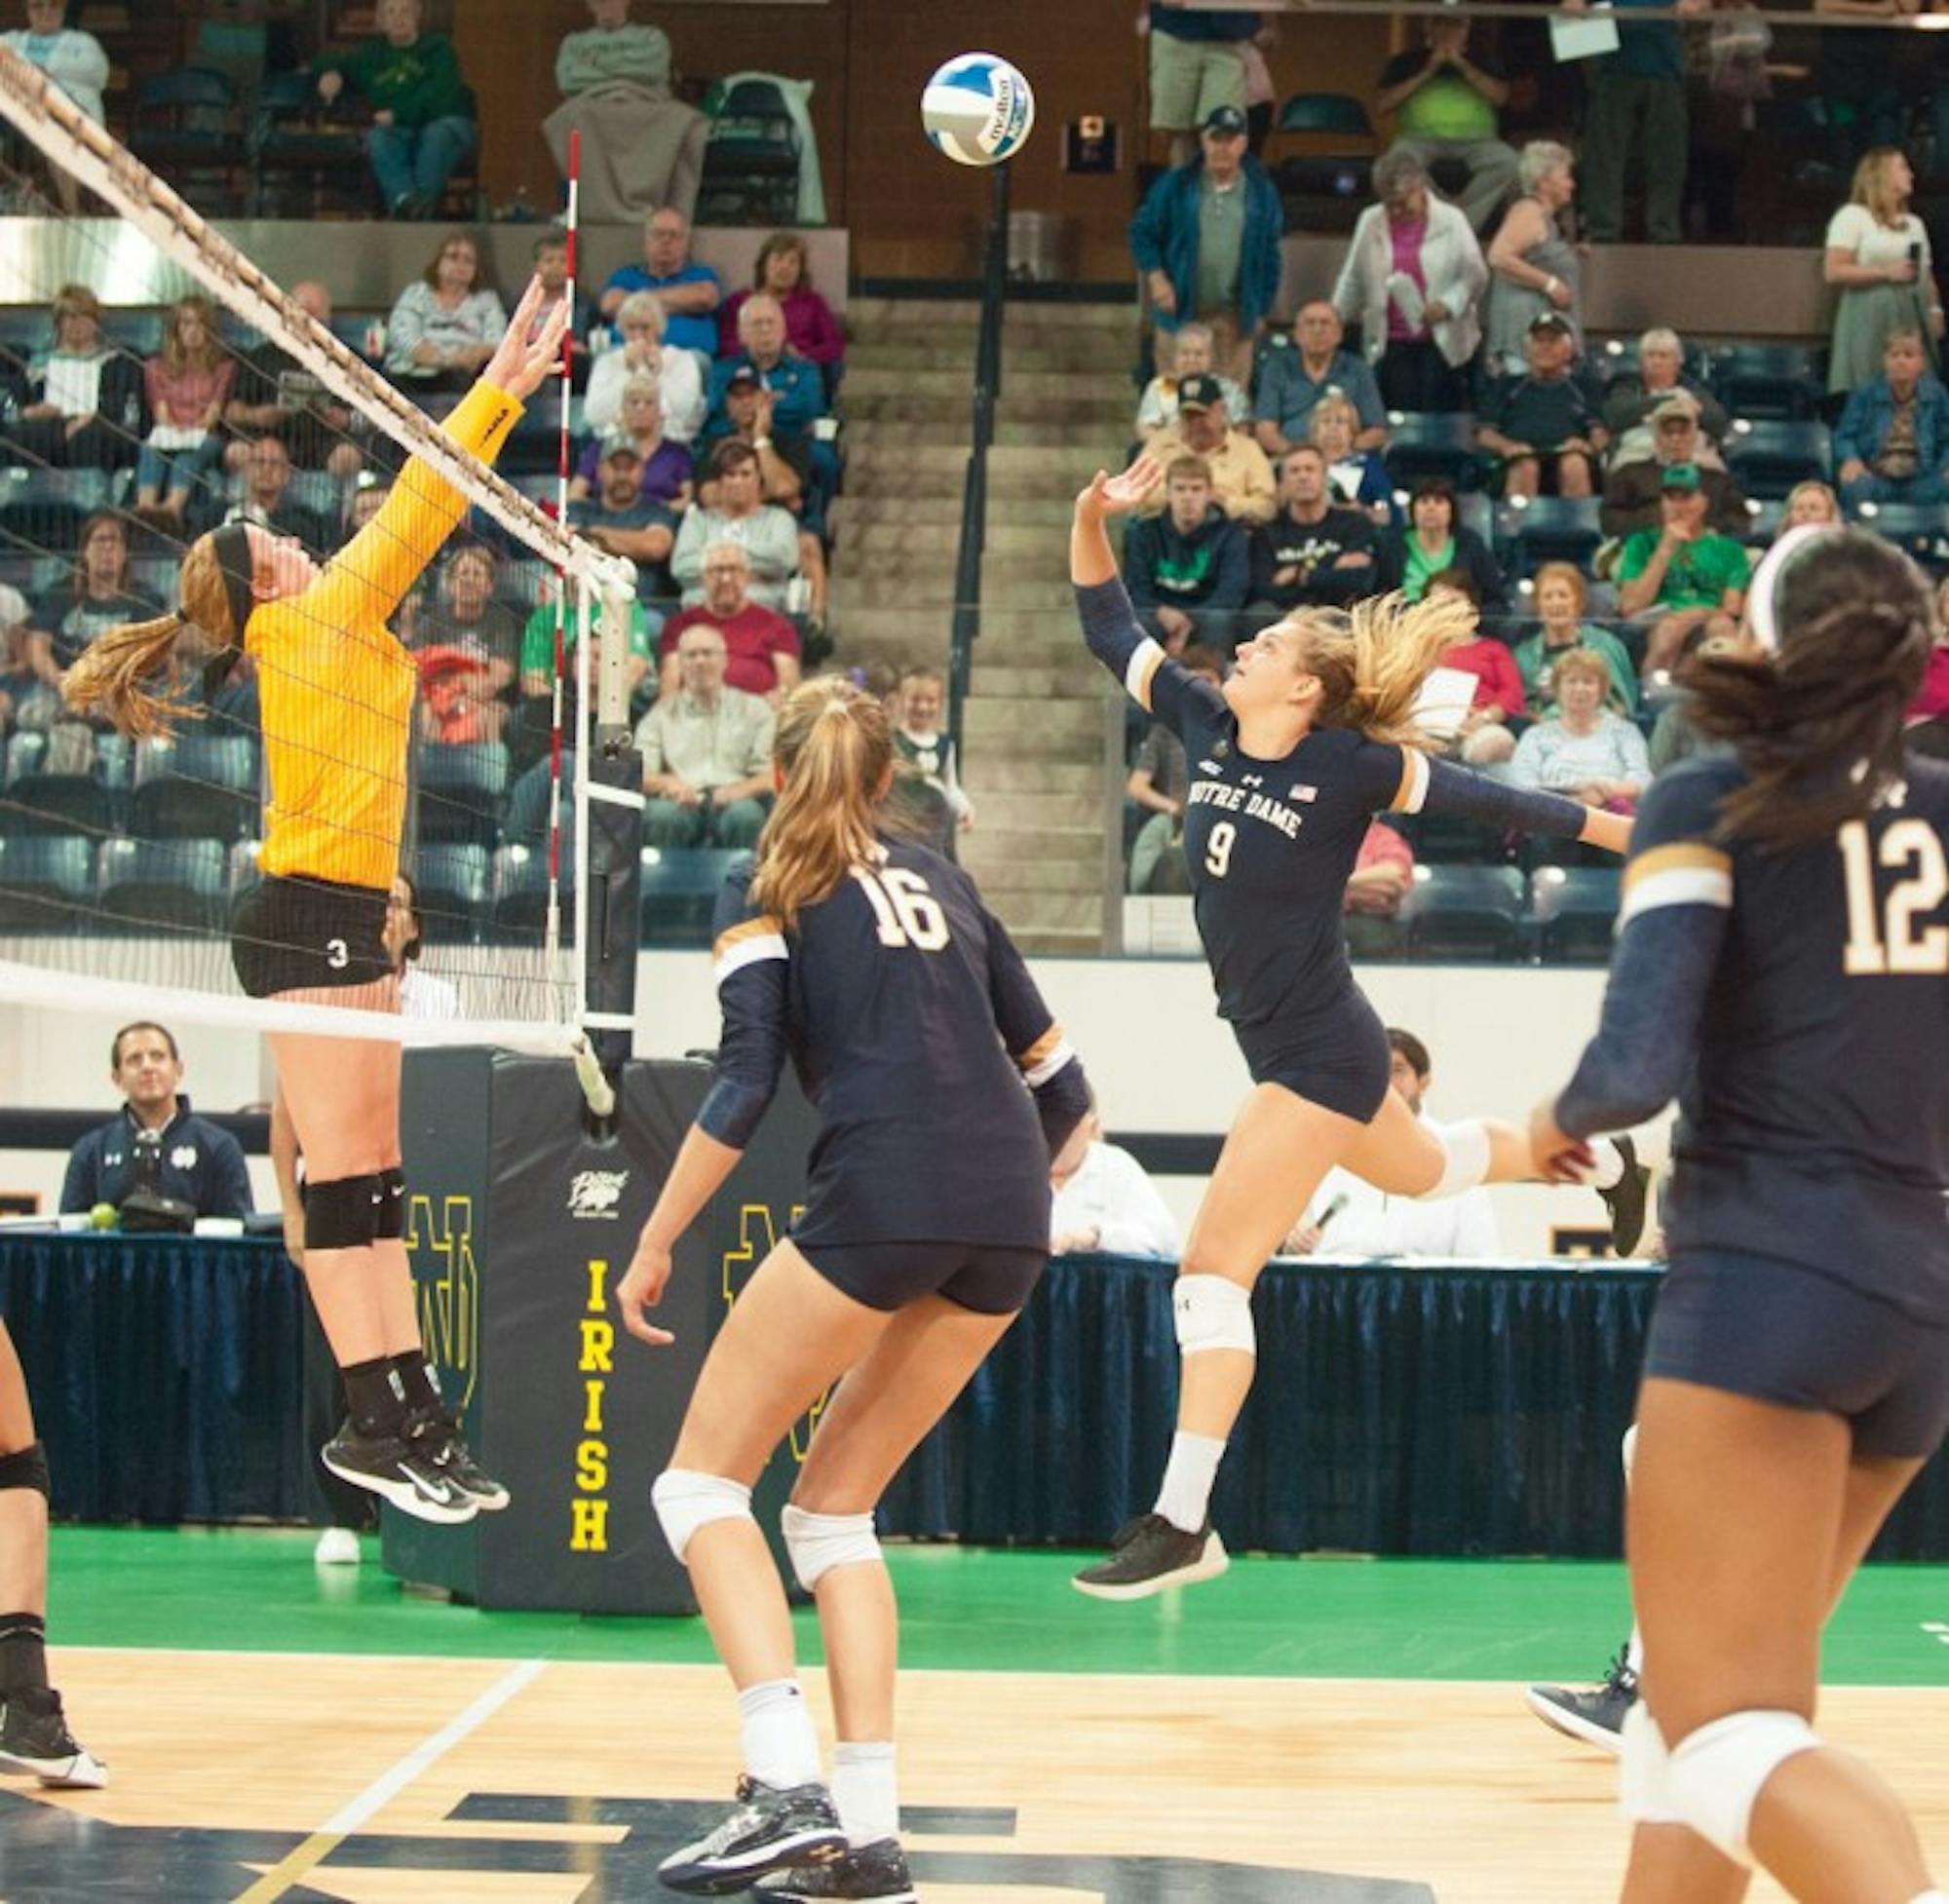 Junior outside hitter Rebecca Nunge goes in for the attack during Notre Dame's 3-1 win over Valparaiso on Aug. 25 at Compton Family Ice Arena.